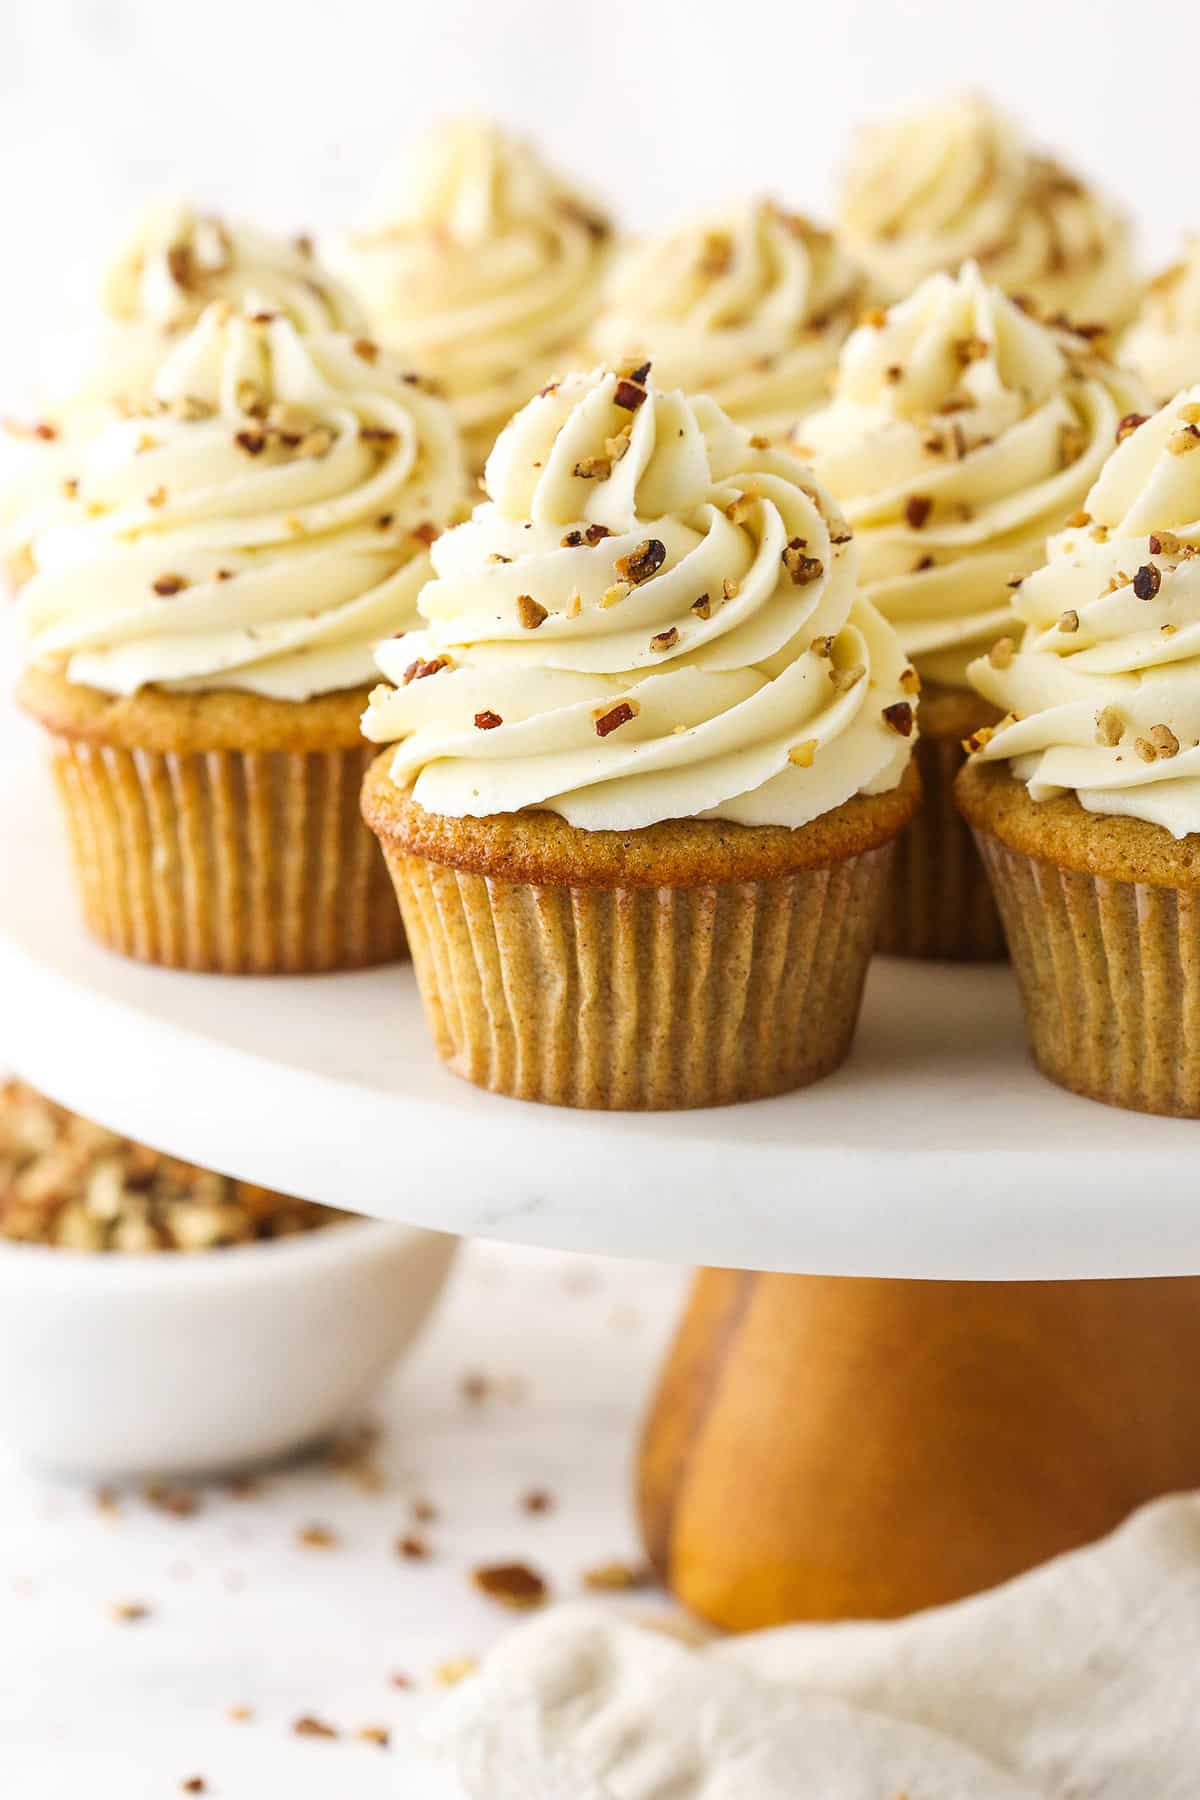 A batch of pecan pie cupcakes on a plastic cake stand with a wooden base